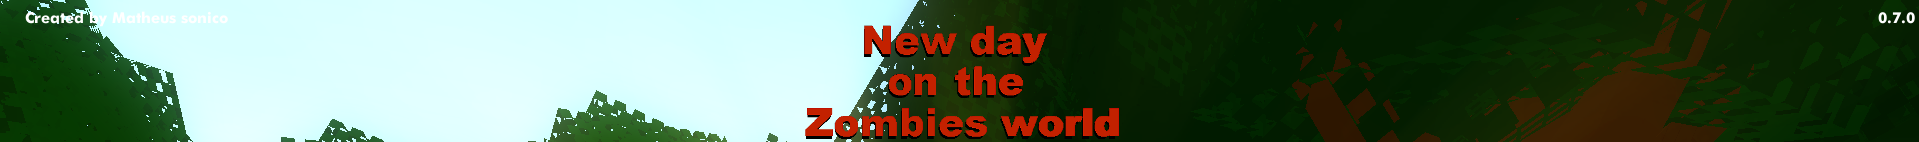 New day on the Zombies Verison 0.7.0